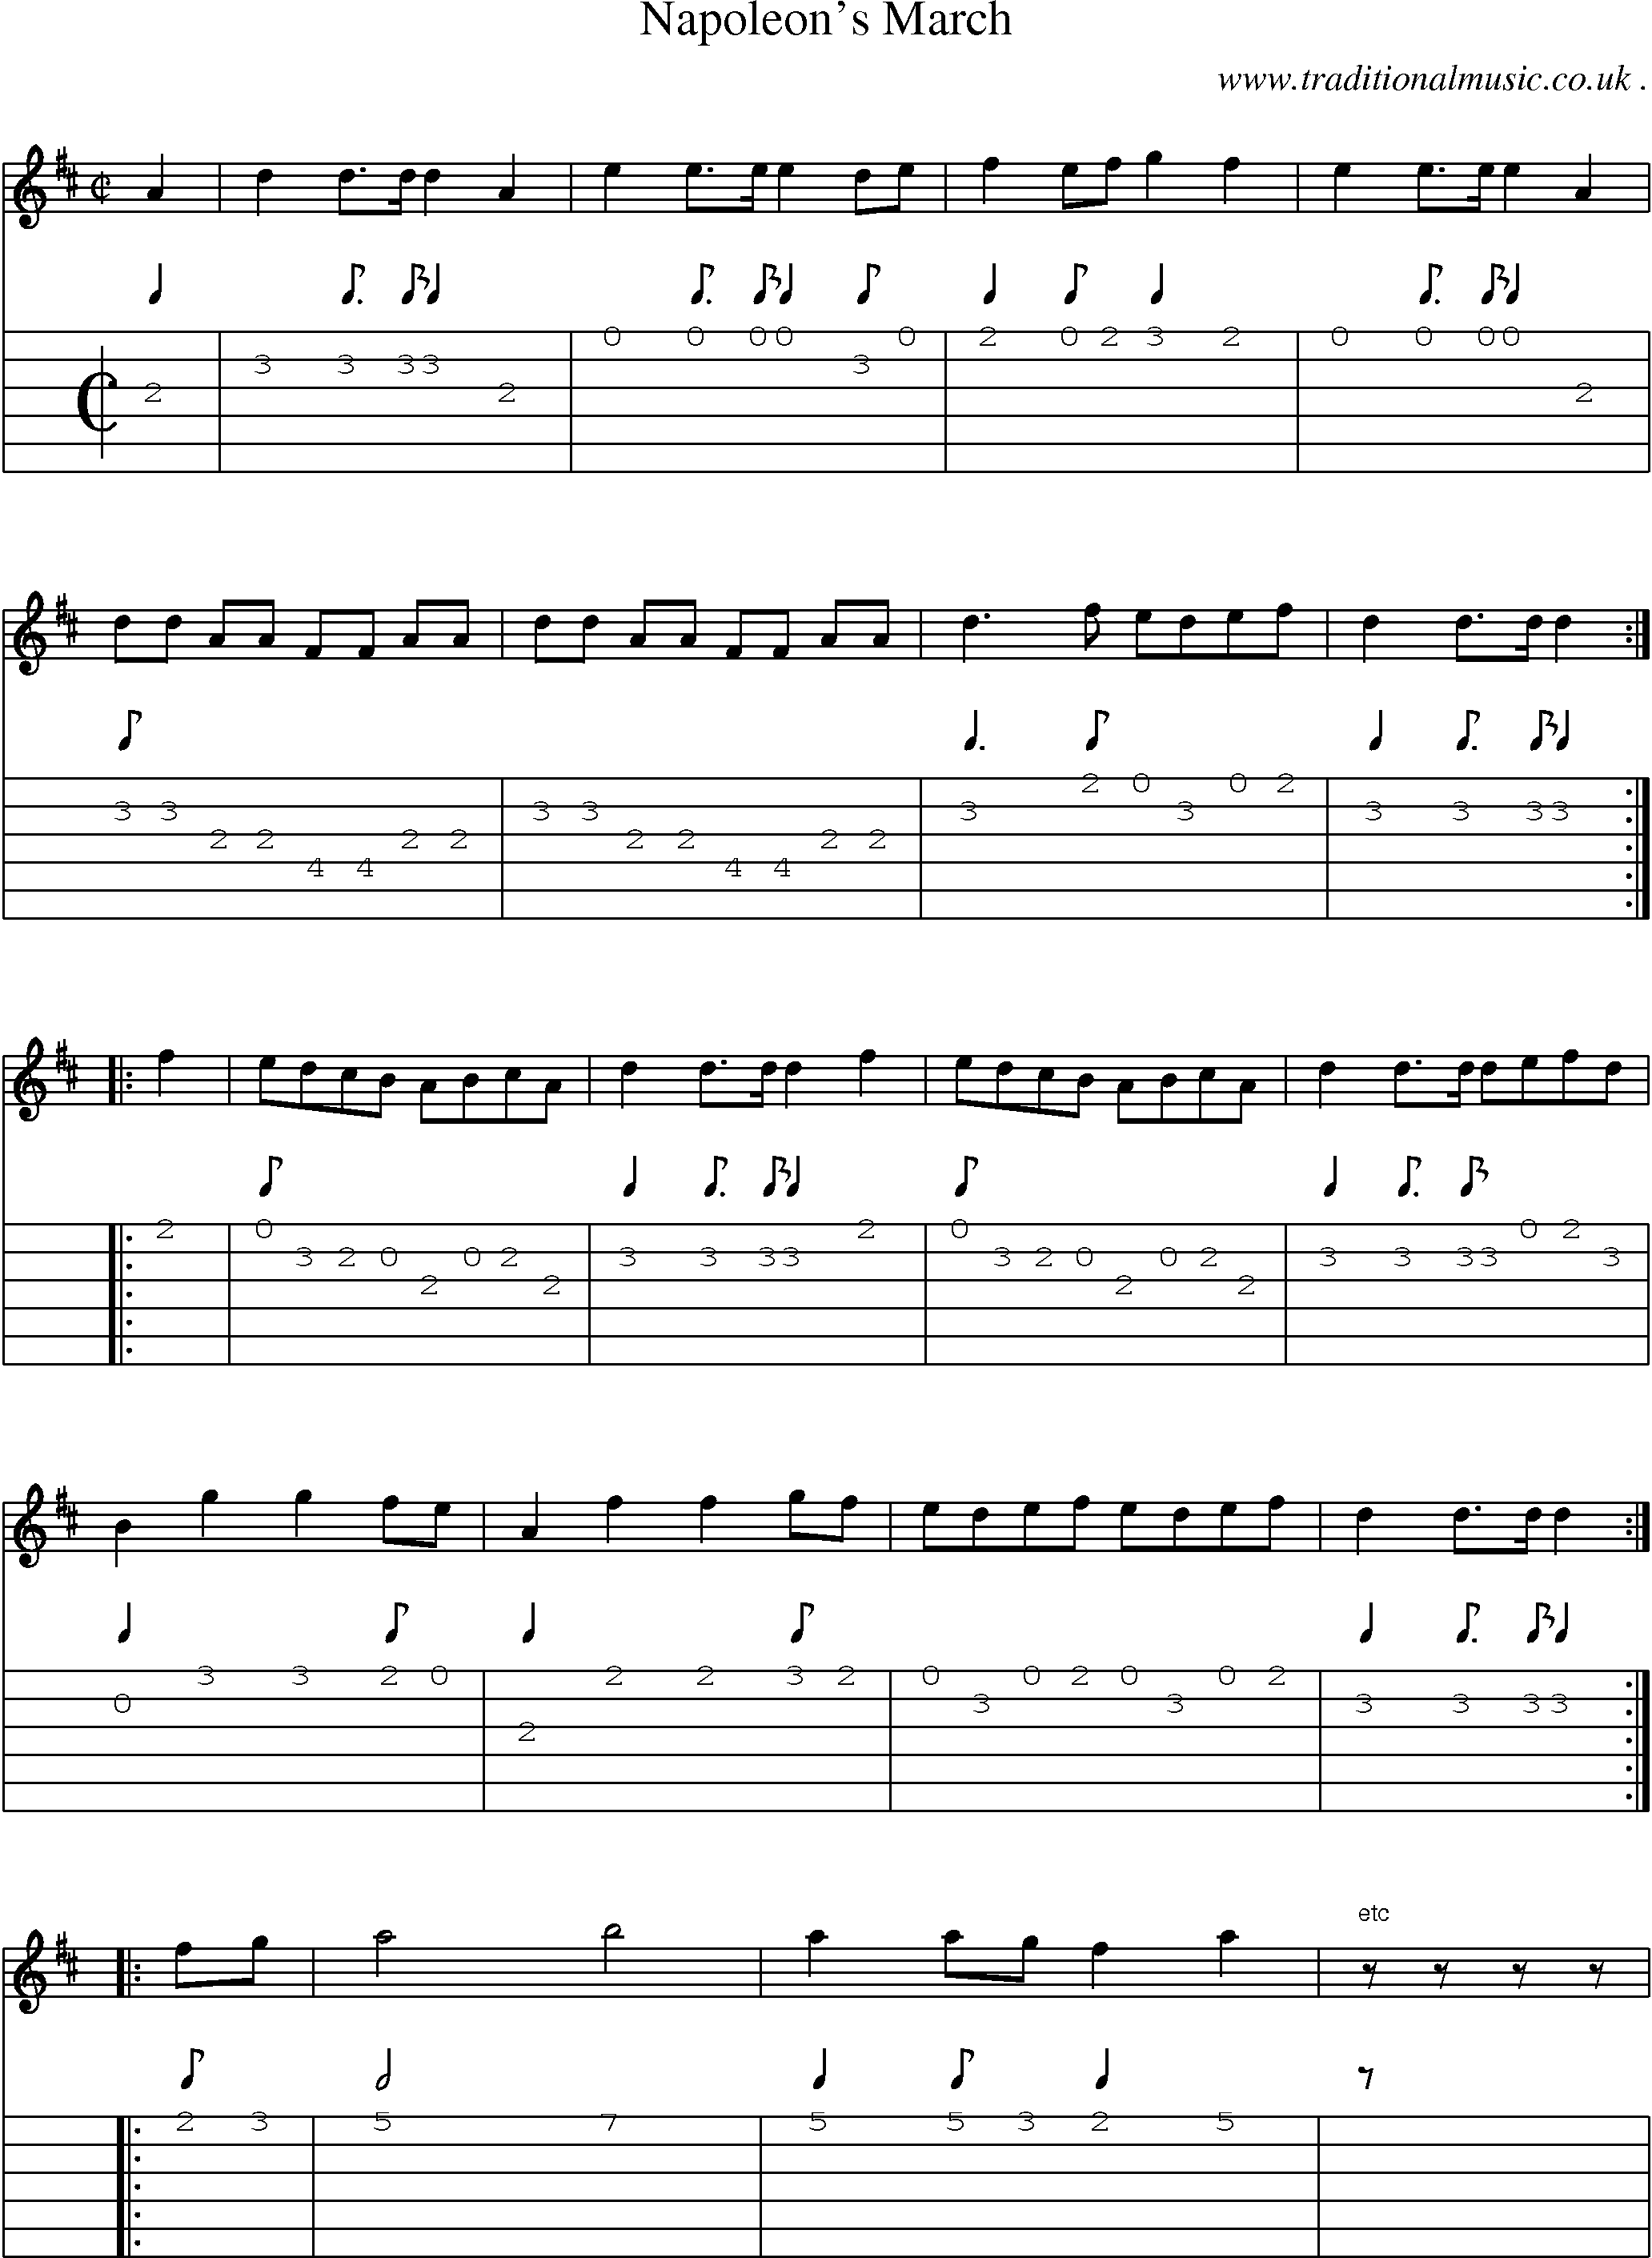 Sheet-Music and Guitar Tabs for Napoleons March